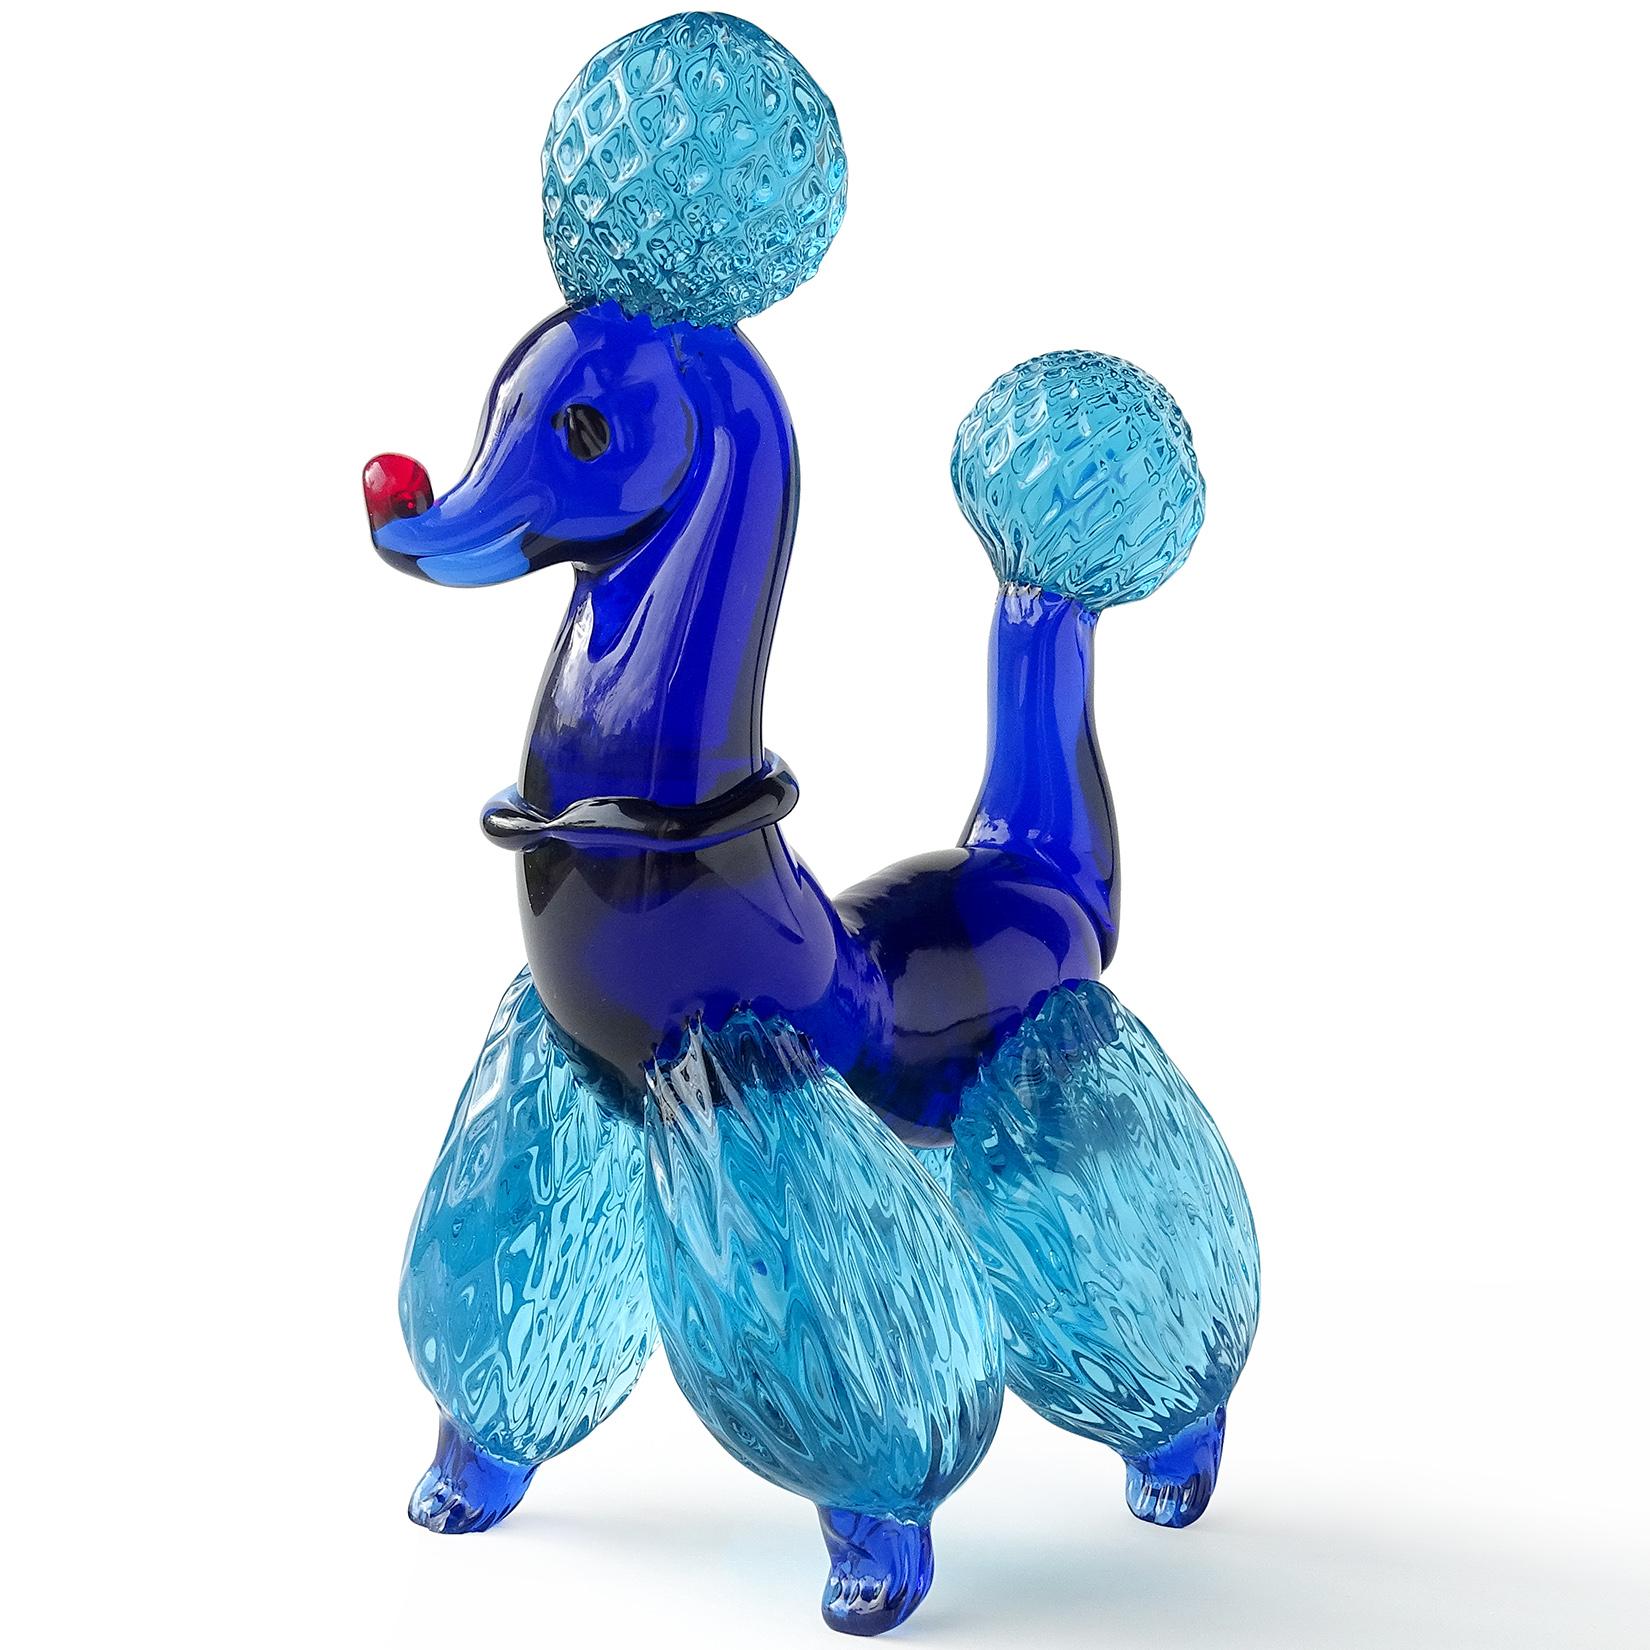 Beautiful Murano hand blown cobalt blue Italian art glass poodle puppy dog sculpture. It has a quilted pom-pom design on the legs, tails and puff on its head. Blue collar on its neck. Very well groomed French poodle, ready for any dog show. One of